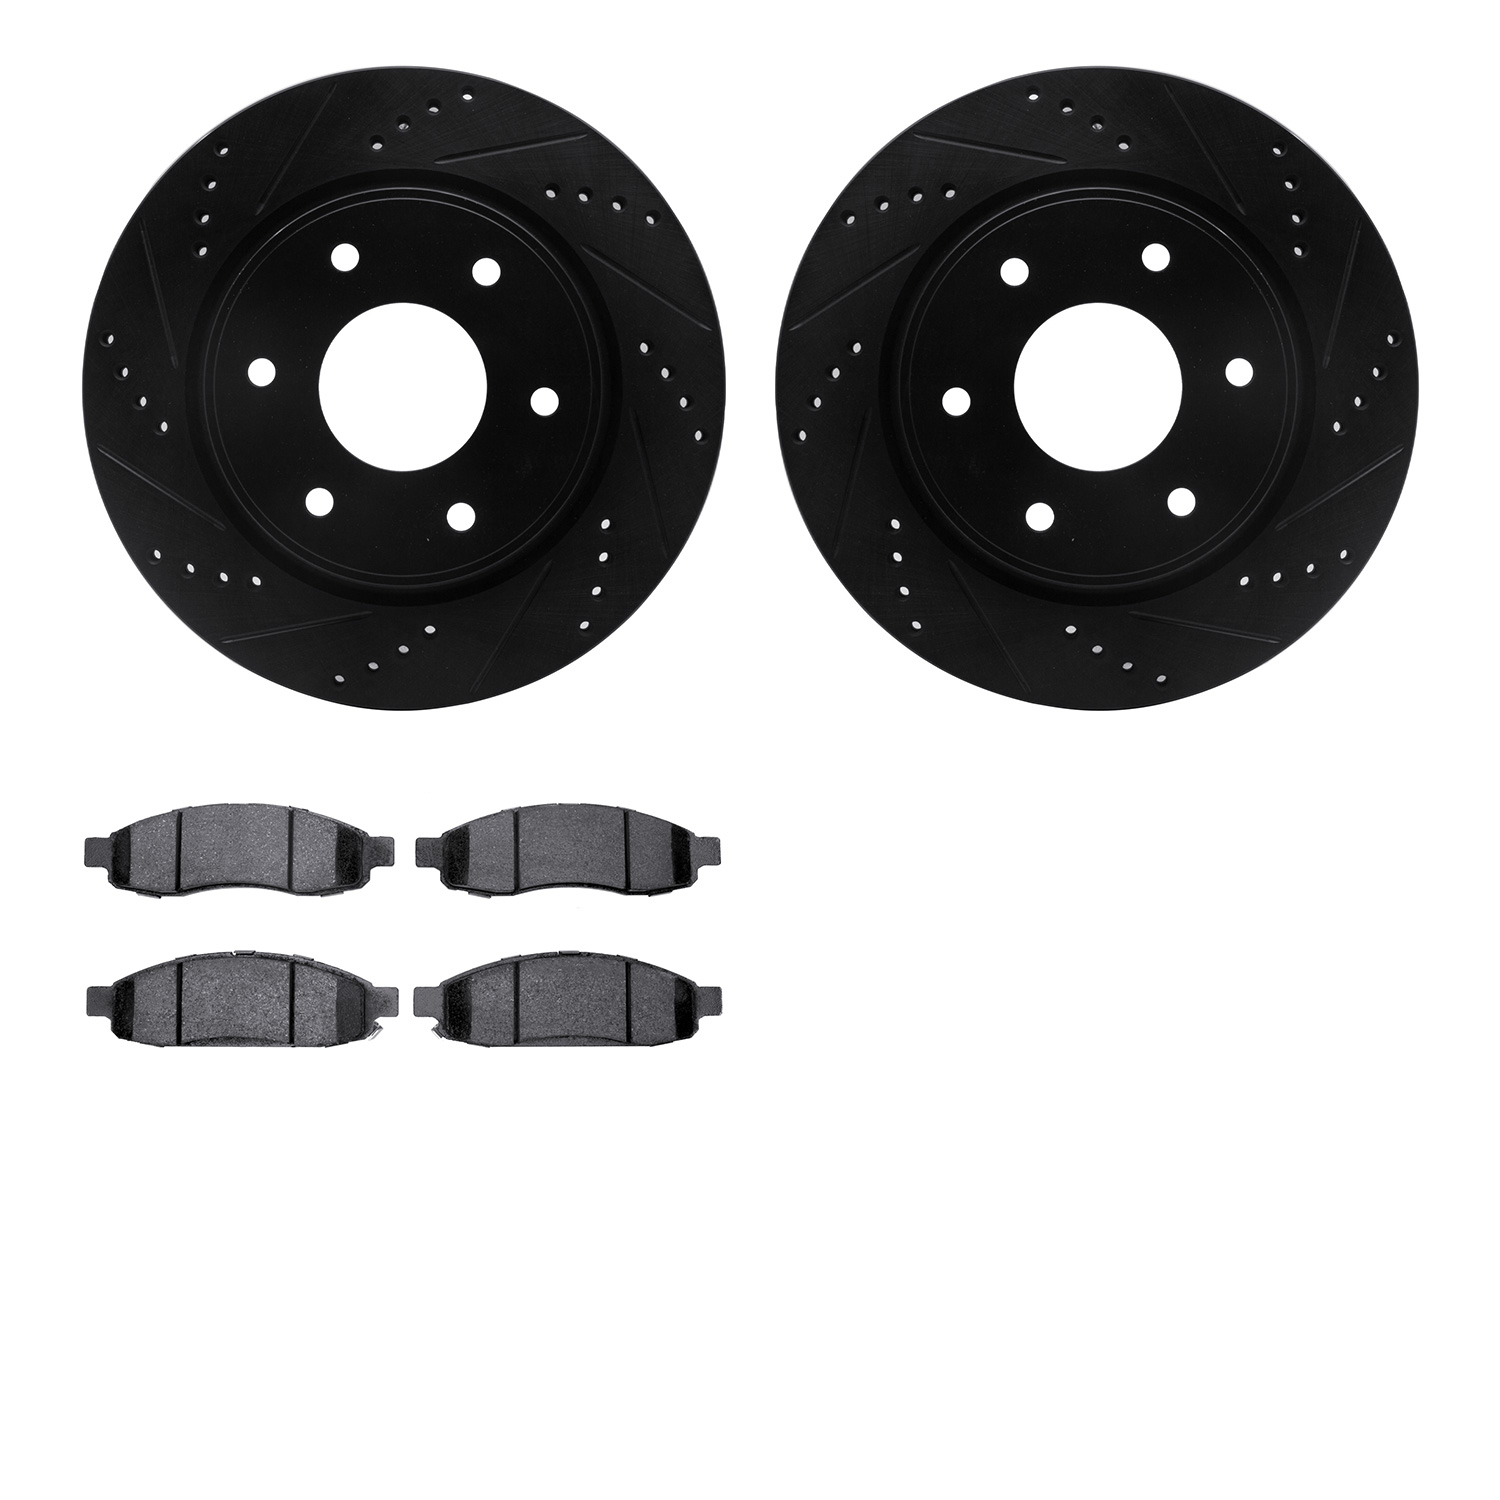 8402-67003 Drilled/Slotted Brake Rotors with Ultimate-Duty Brake Pads Kit [Black], 2005-2007 Infiniti/Nissan, Position: Front